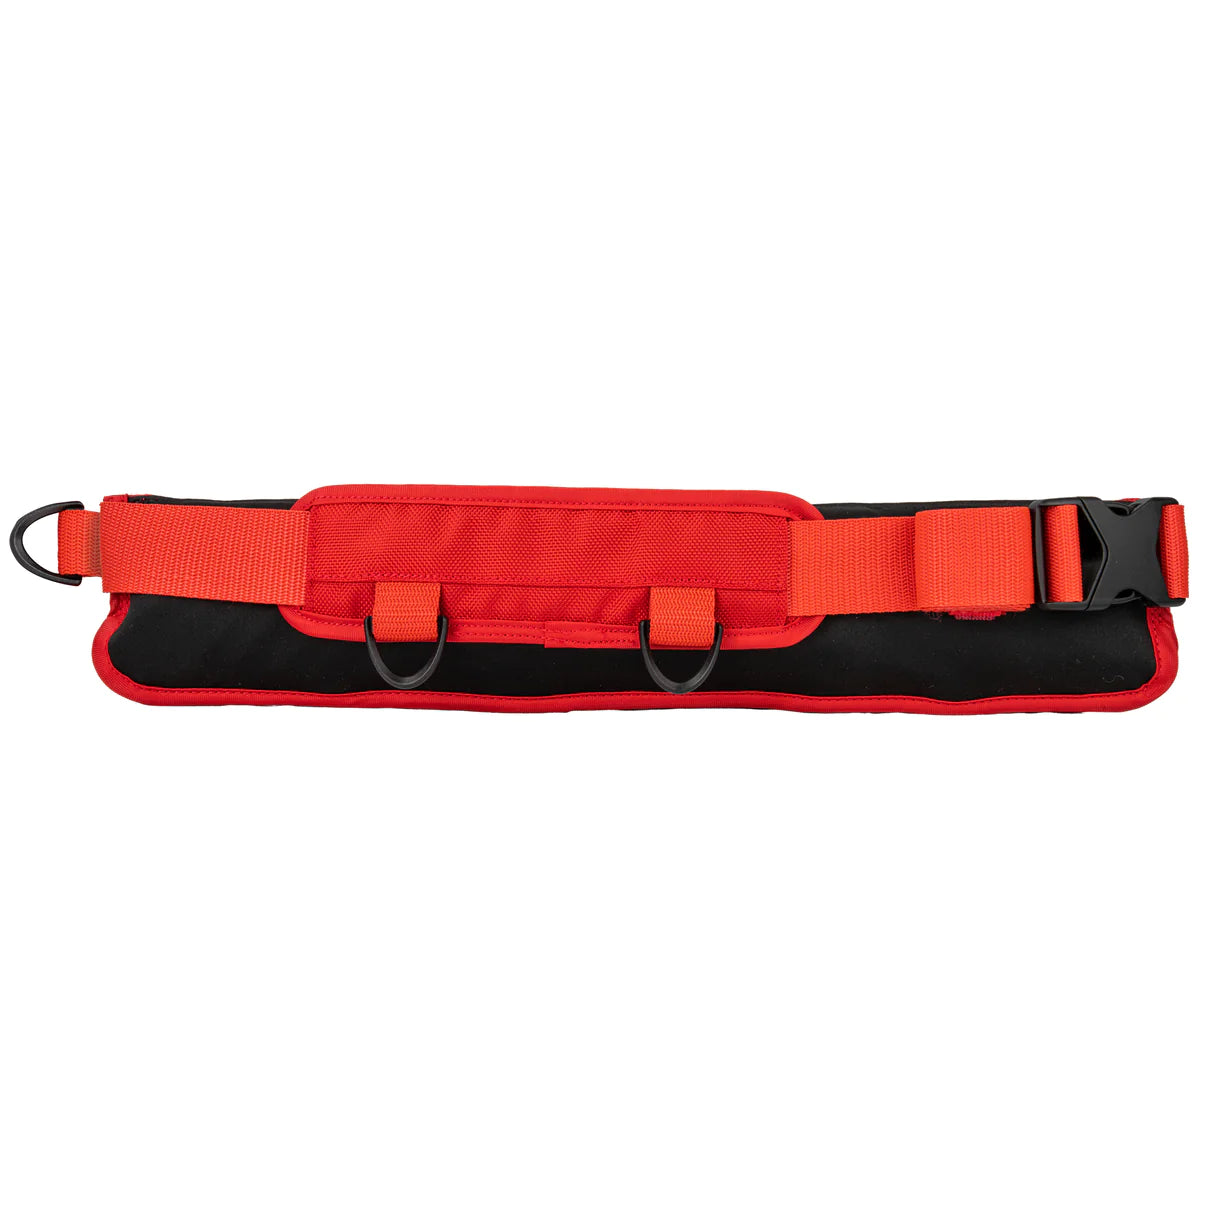 Bluestorm Cirro 16 Manual Inflatable Life Jacket - USCG Approved